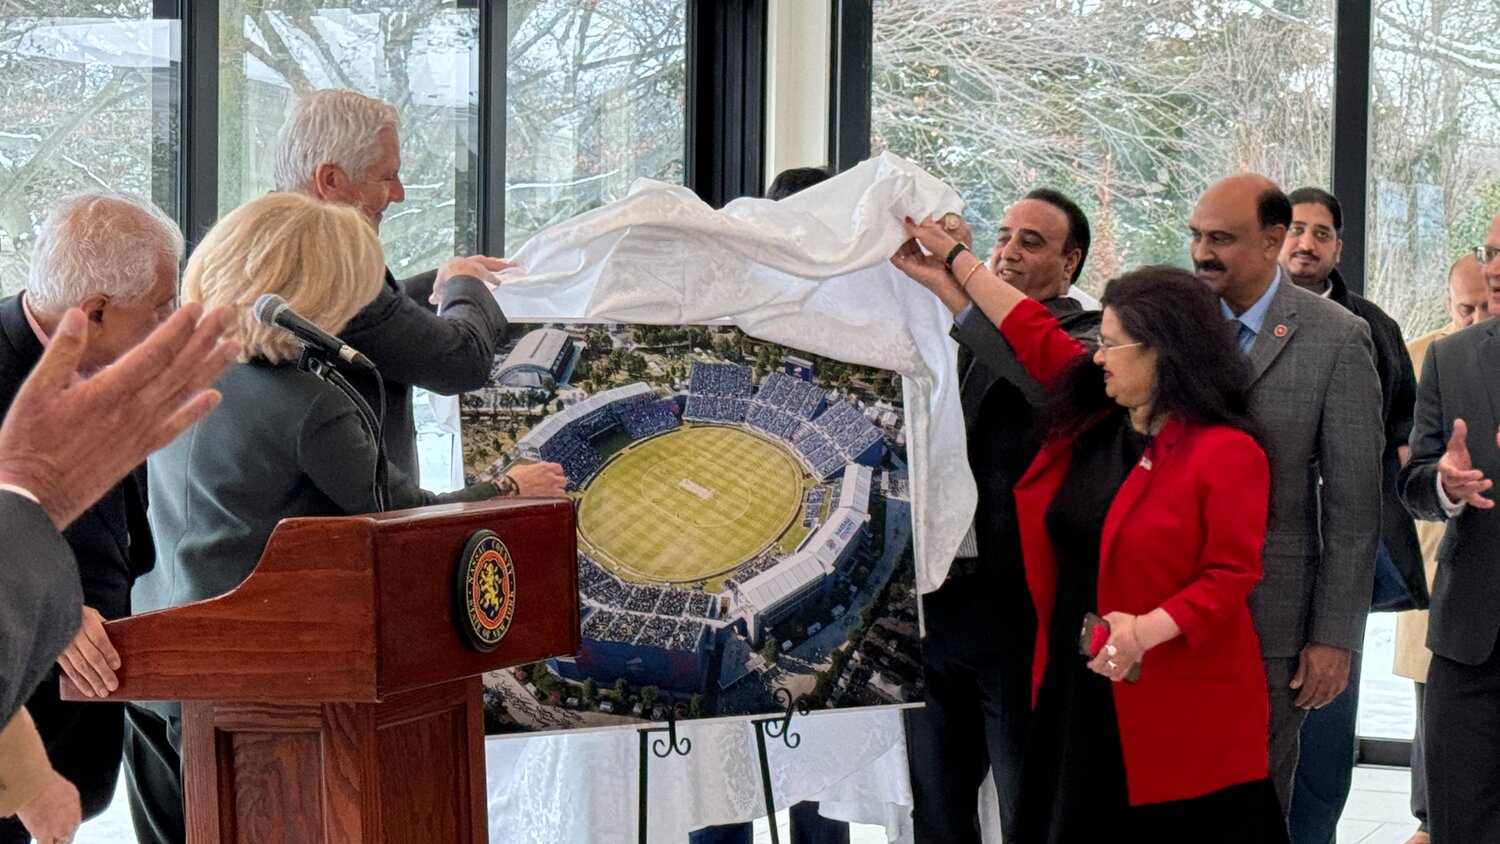 Nassau County officials and members of the local host committee for the T20 Cricket World Cup unveiled the renderings of a temporary cricket stadium intended to  be built in Eisenhower Park, holding up to 35,000 fans. Games will be played in East Meadow between June 3 and June 12.